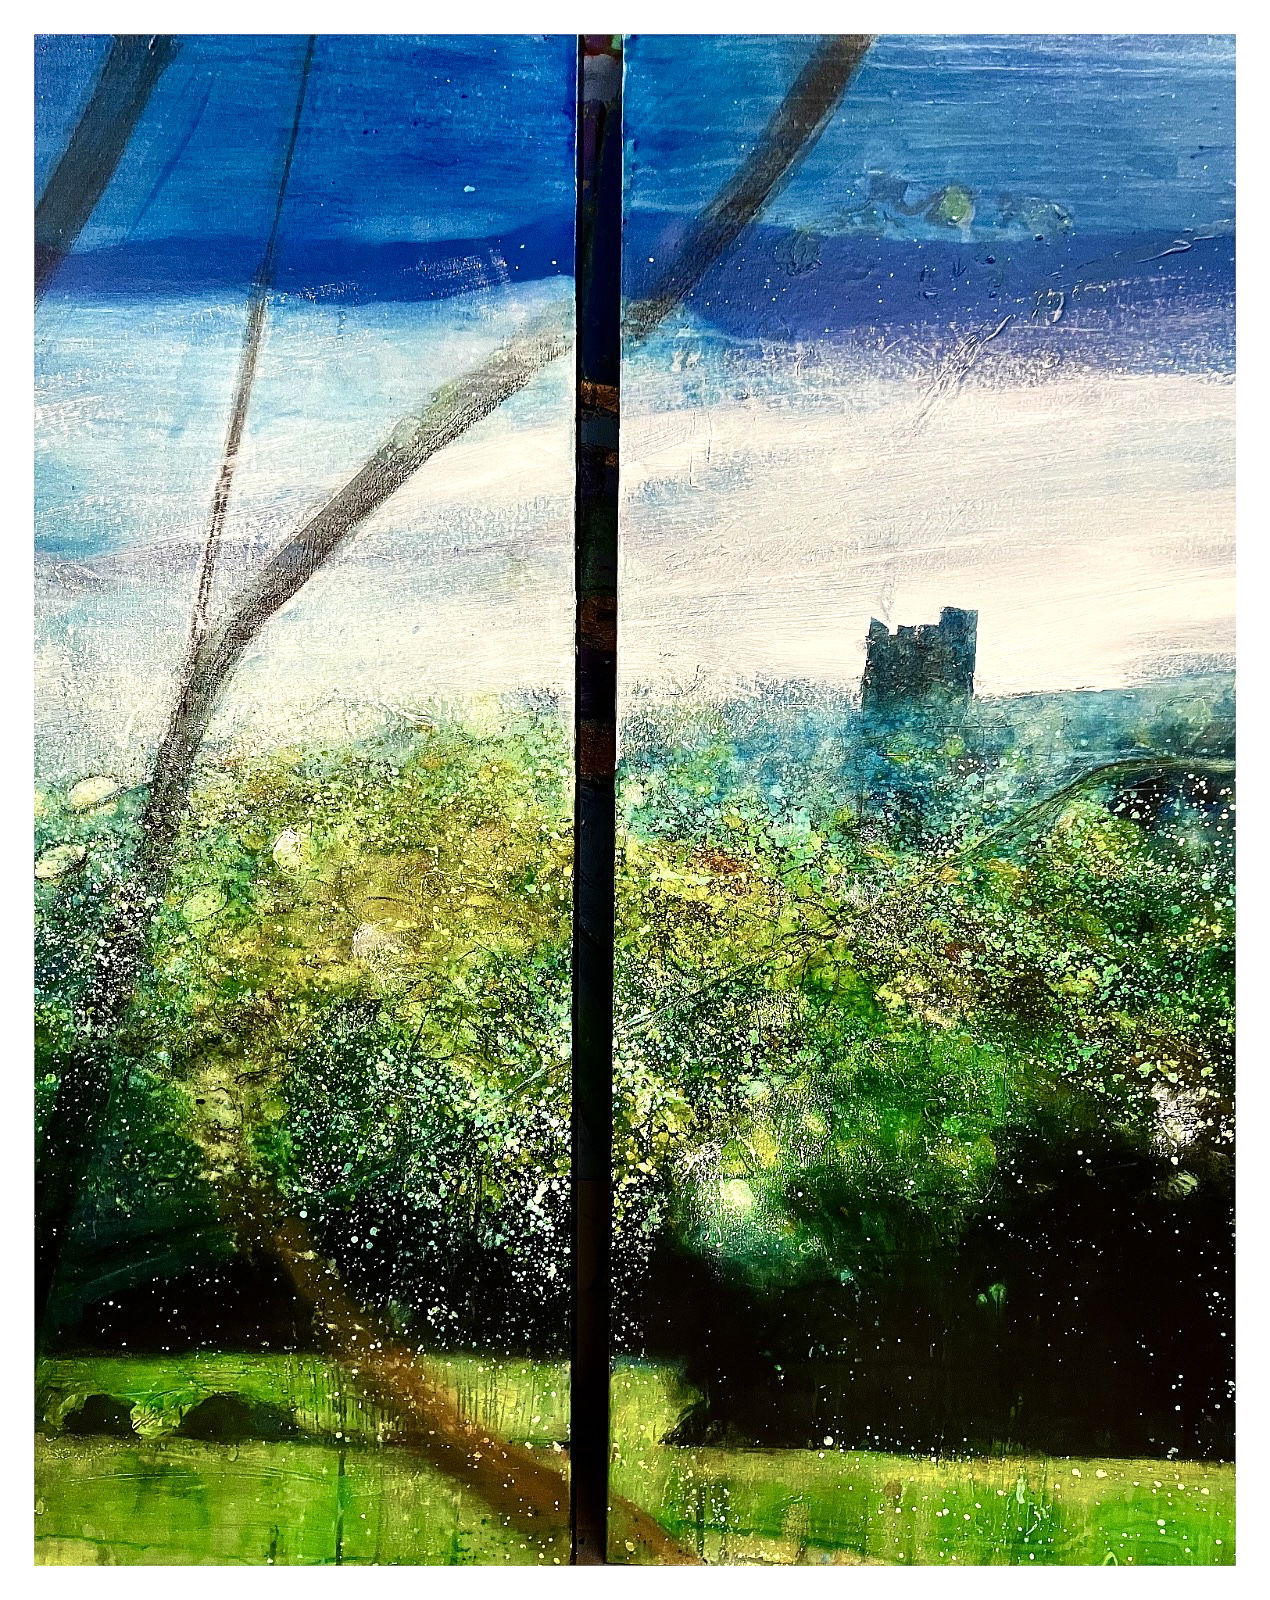 Diptych - The Coming of Spring (not a complete photo)